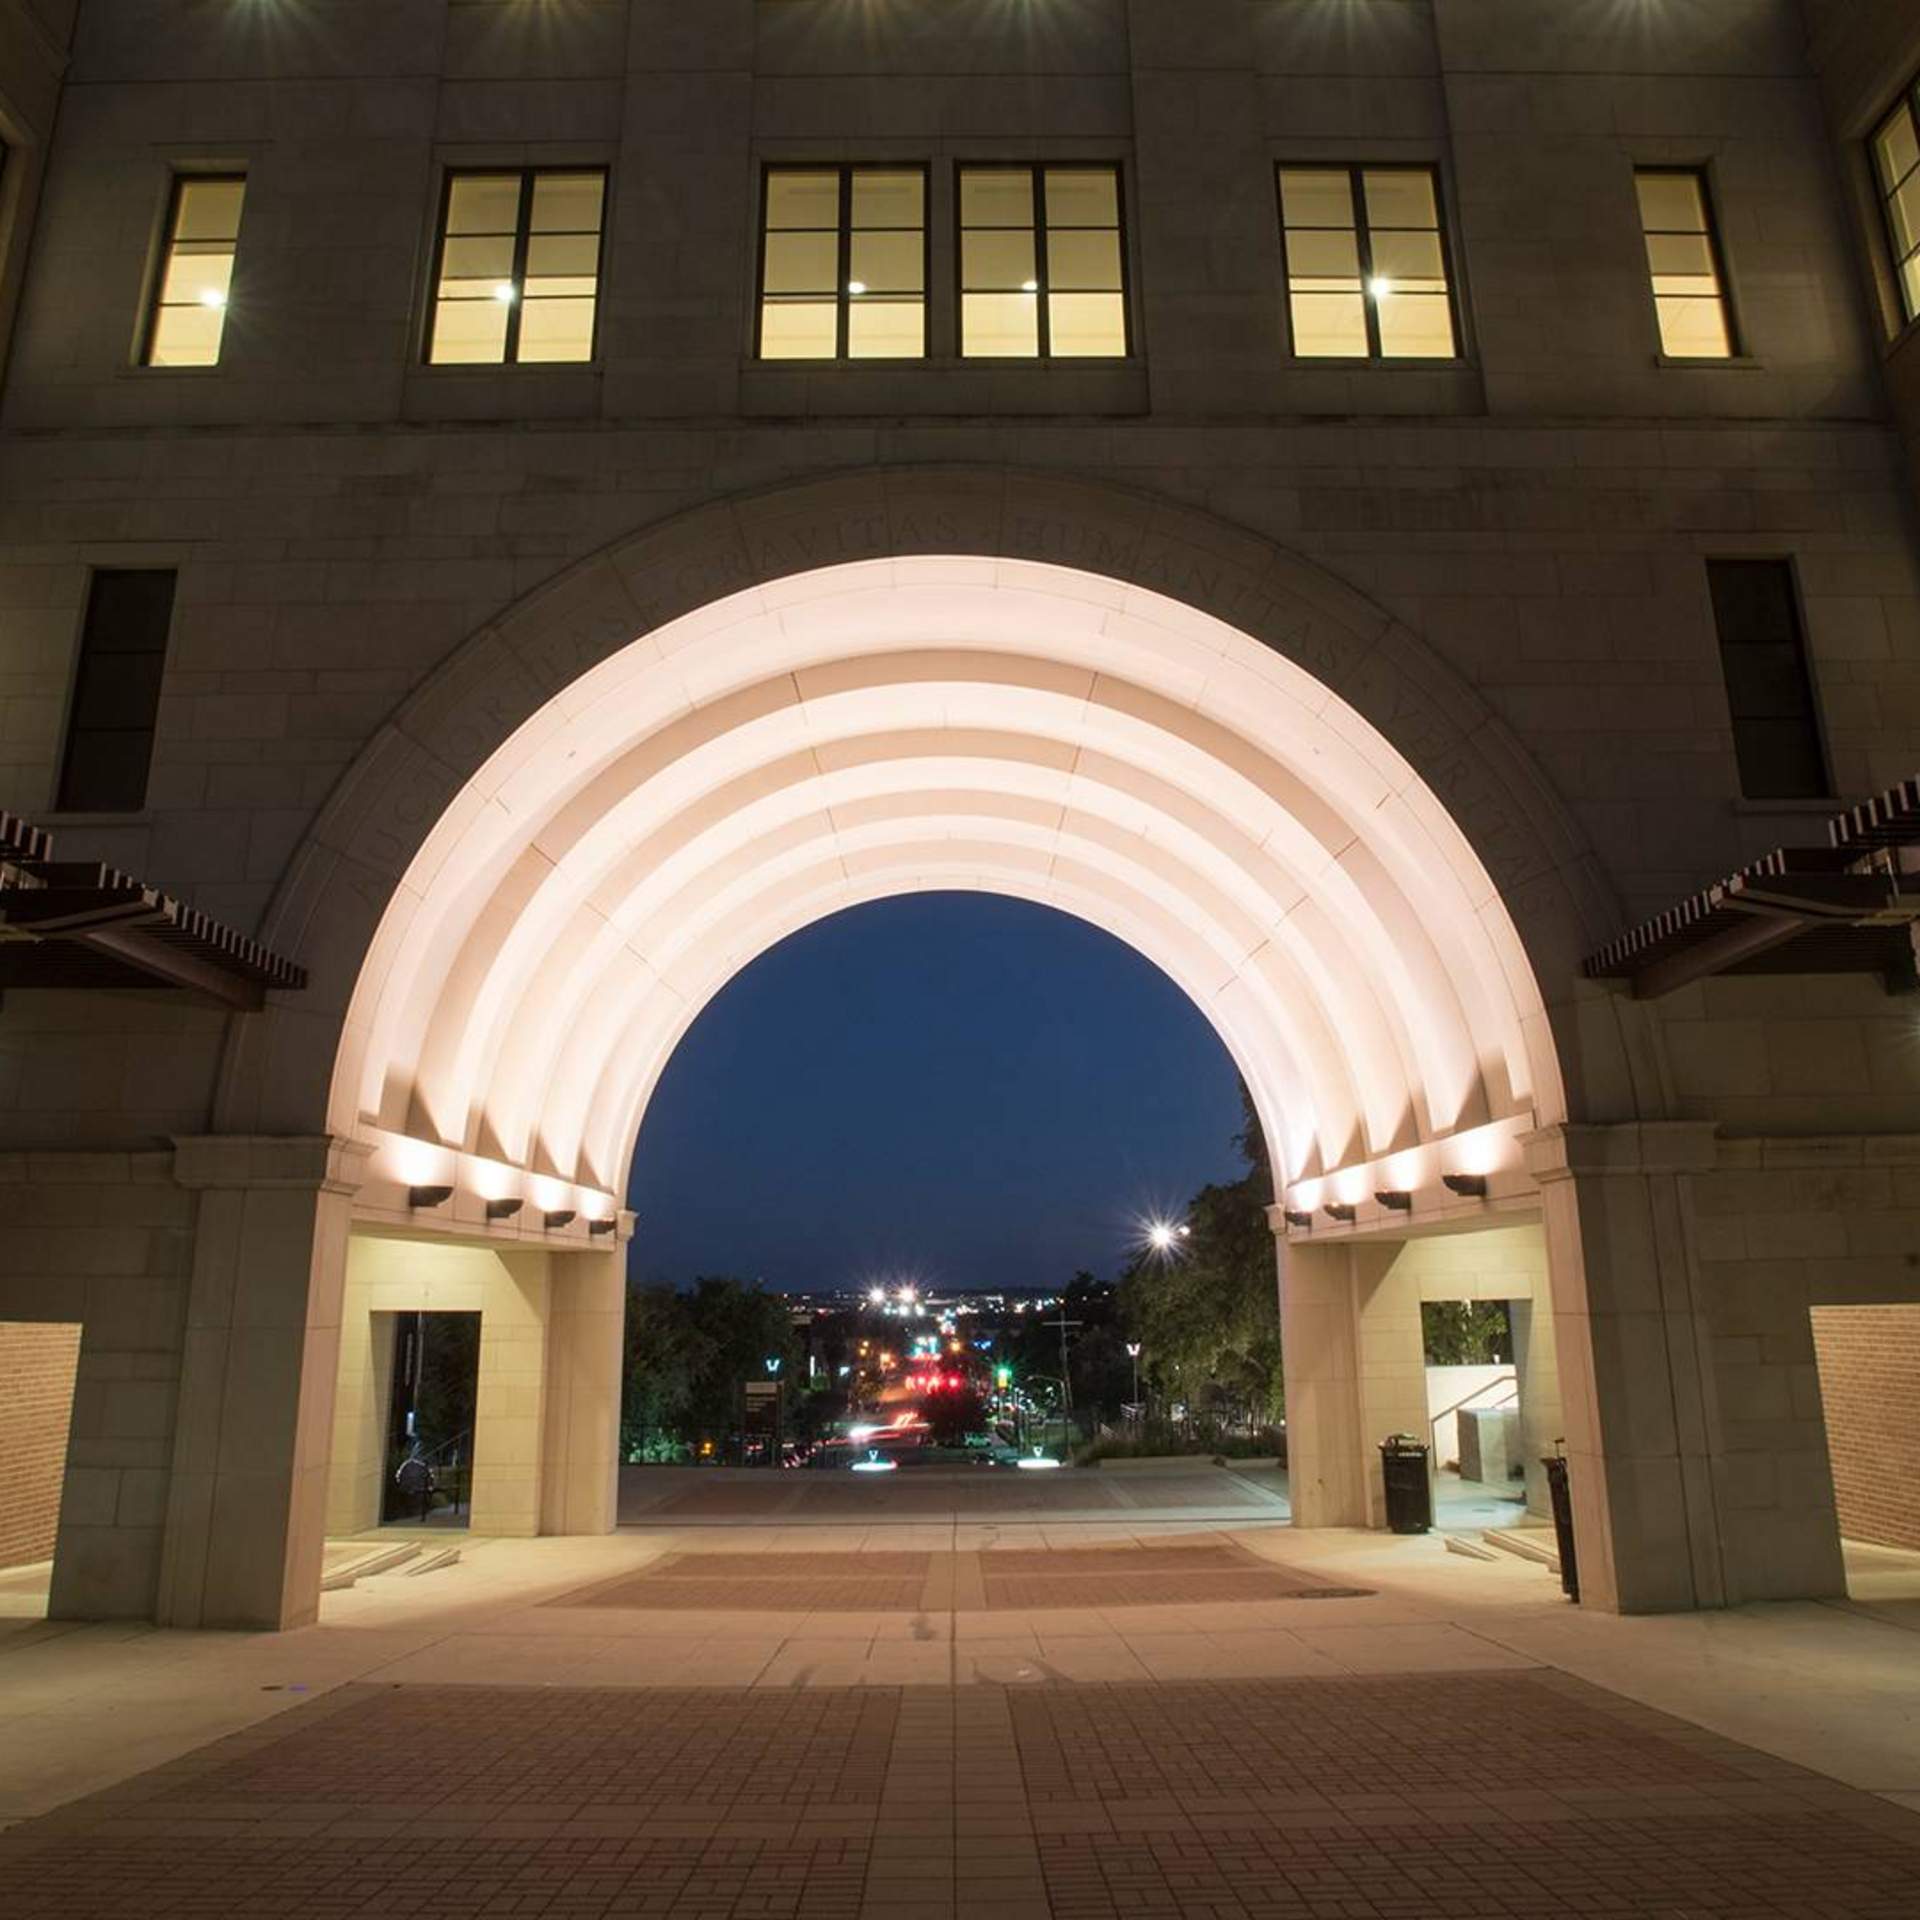 The Arch at night